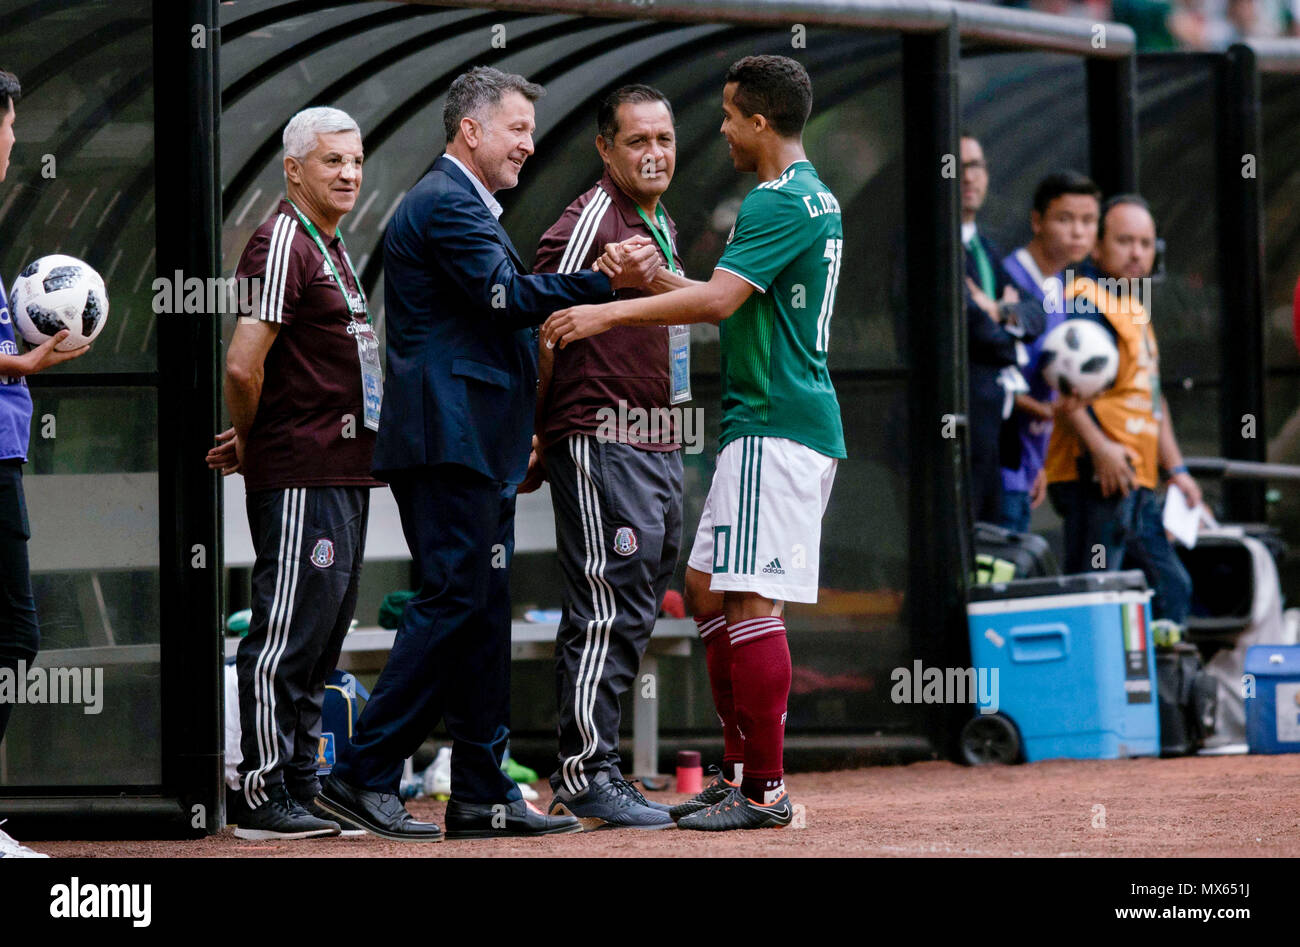 Mexico City, Mexico. 2nd June, 2018. Giovani Dos Santos (R front) of Mexico celebrates his goal with Mexico's head coach Juan Carlos Osorio (L2) during the international friendly match against Scotland before the 2018 FIFA World Cup in Mexico City, capital of Mexico, June 2, 2018. Credit: Luis Licona/STRAFFON IMAGES/Xinhua/Alamy Live News Stock Photo